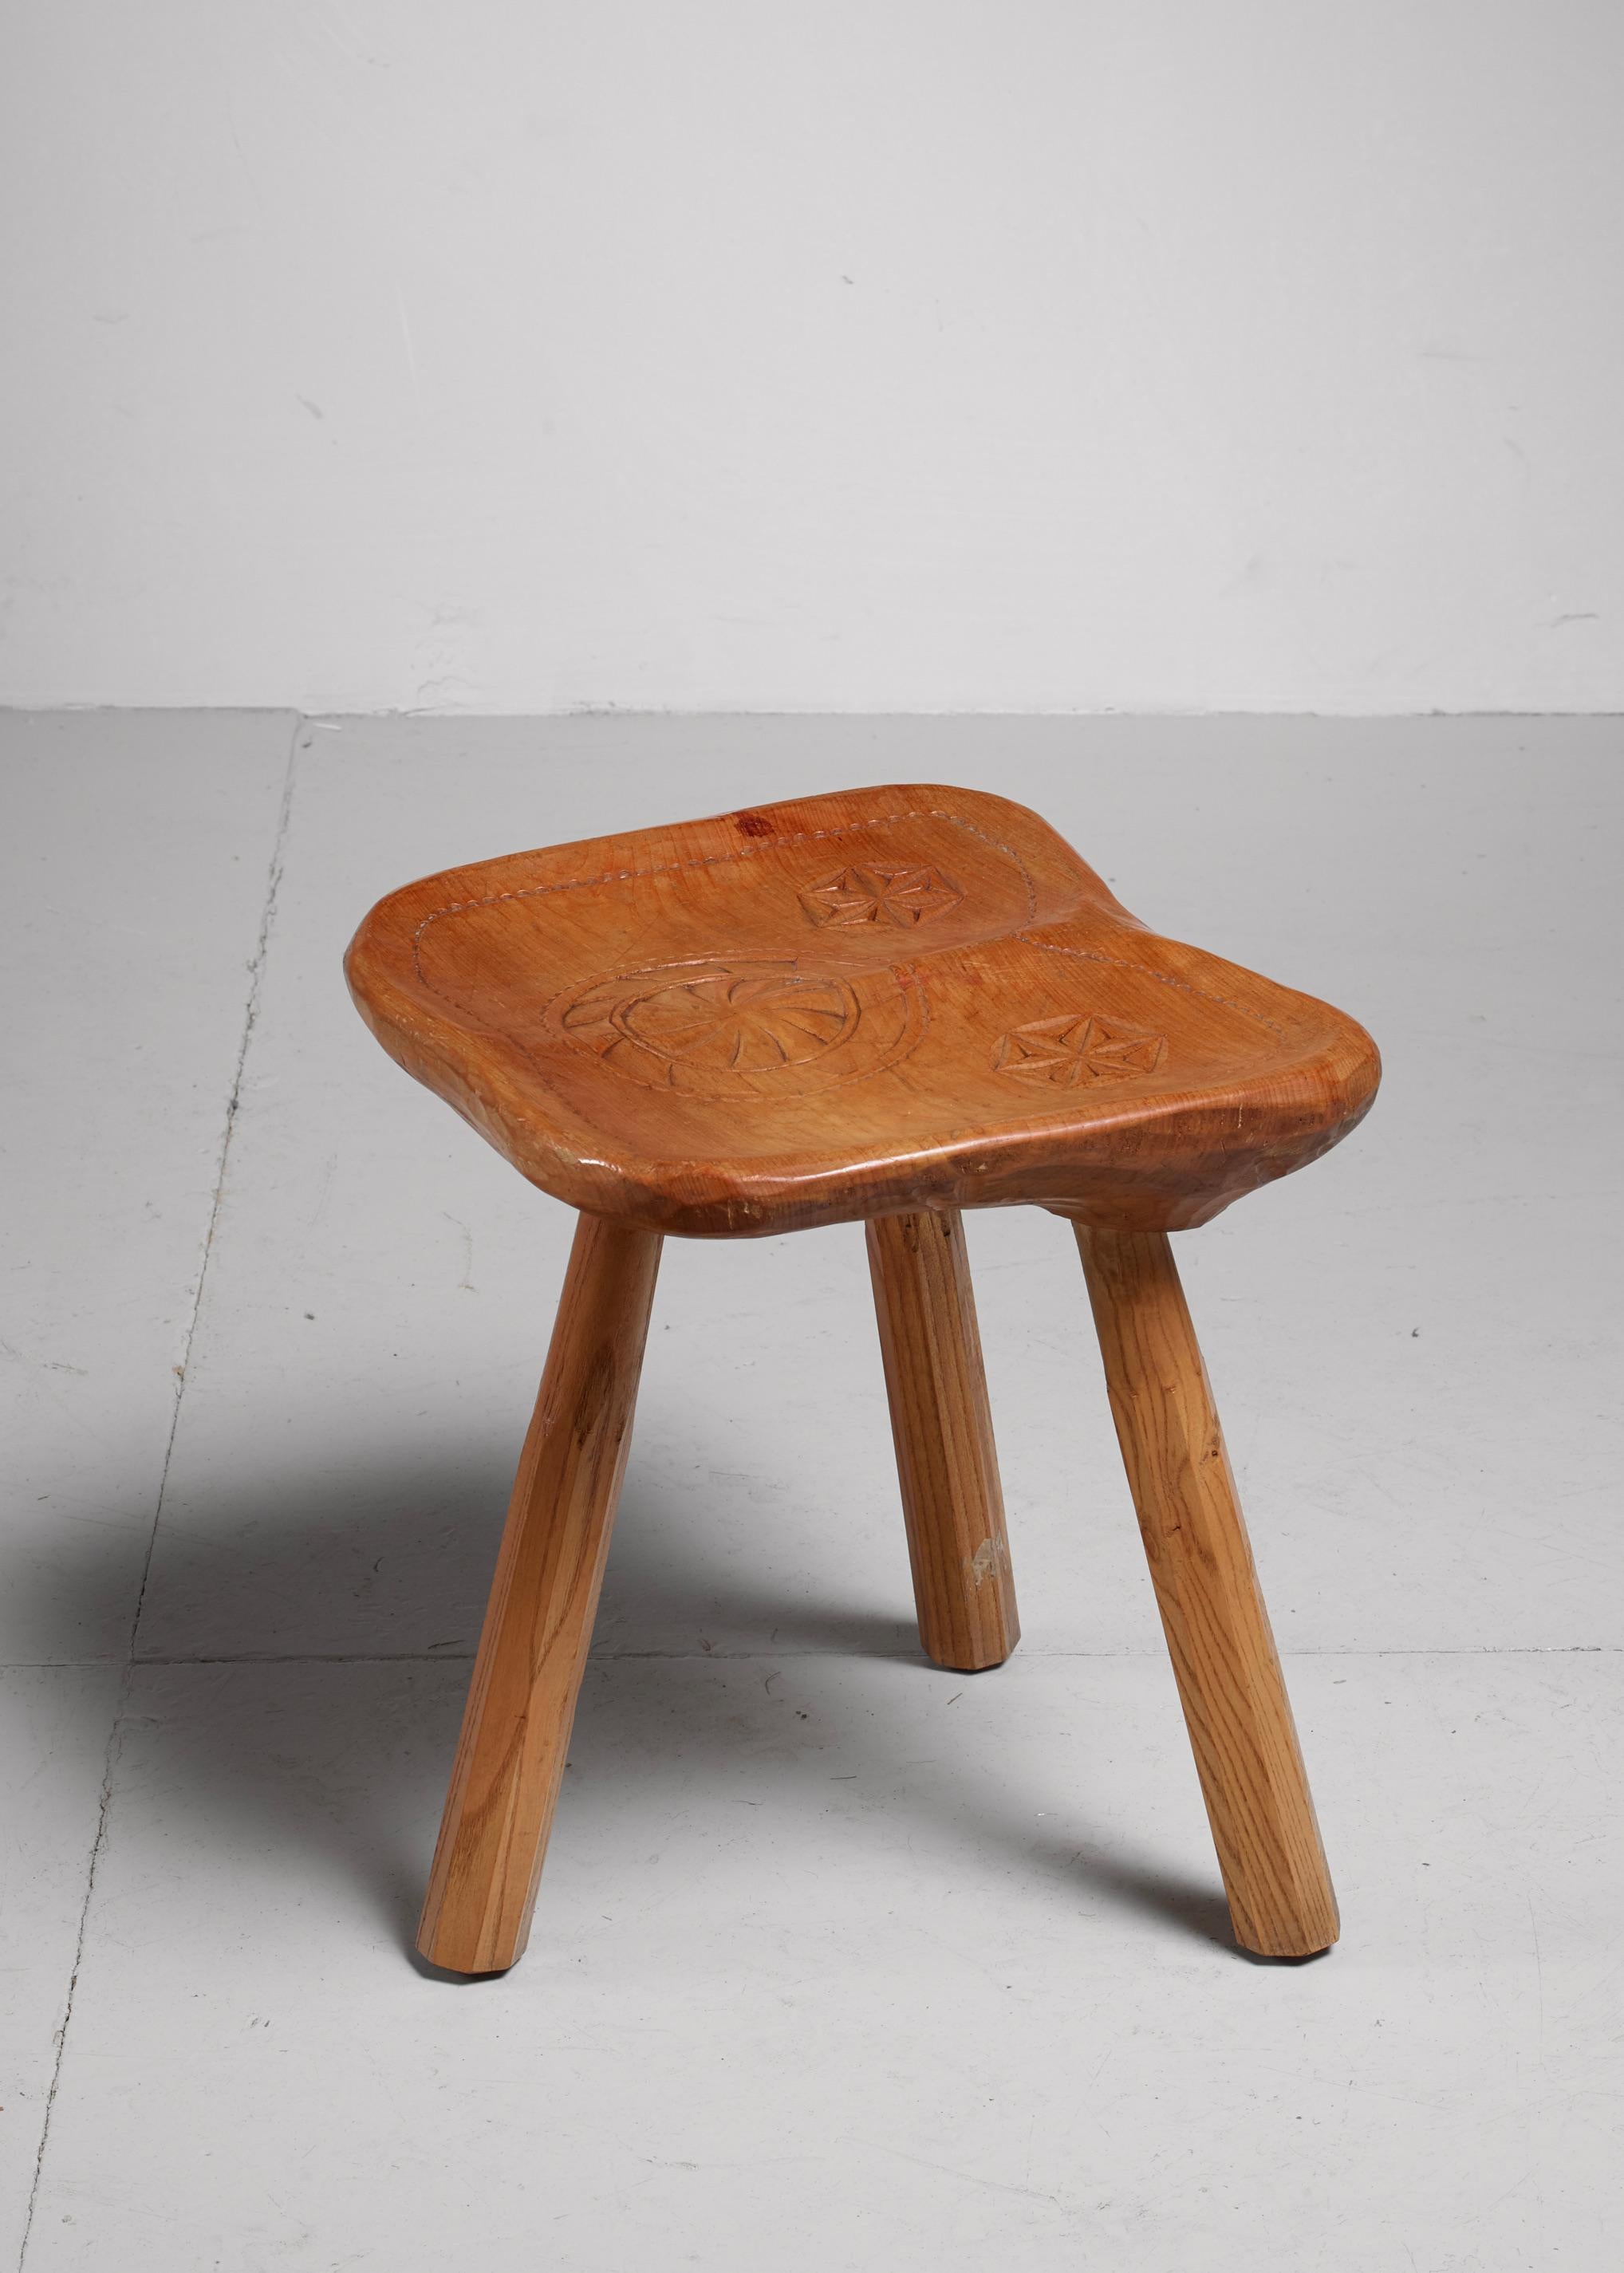 Franco Armand Solid Sculpted Wood Stool, Italy, 1966 In Good Condition For Sale In Maastricht, NL